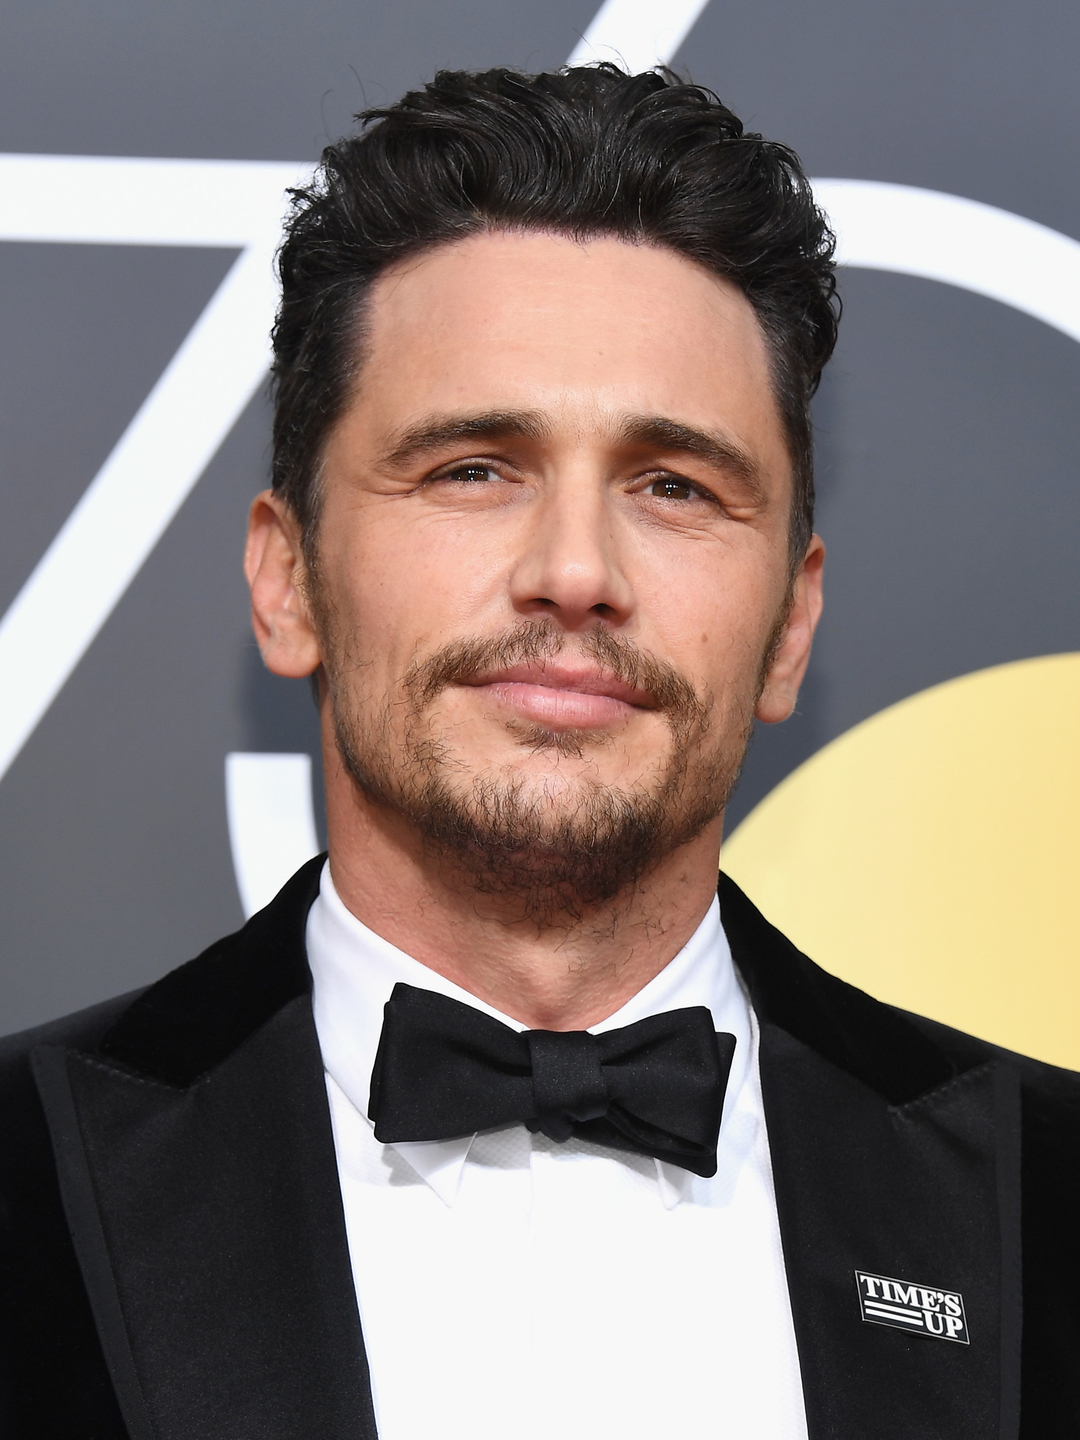 James Franco who is his mother